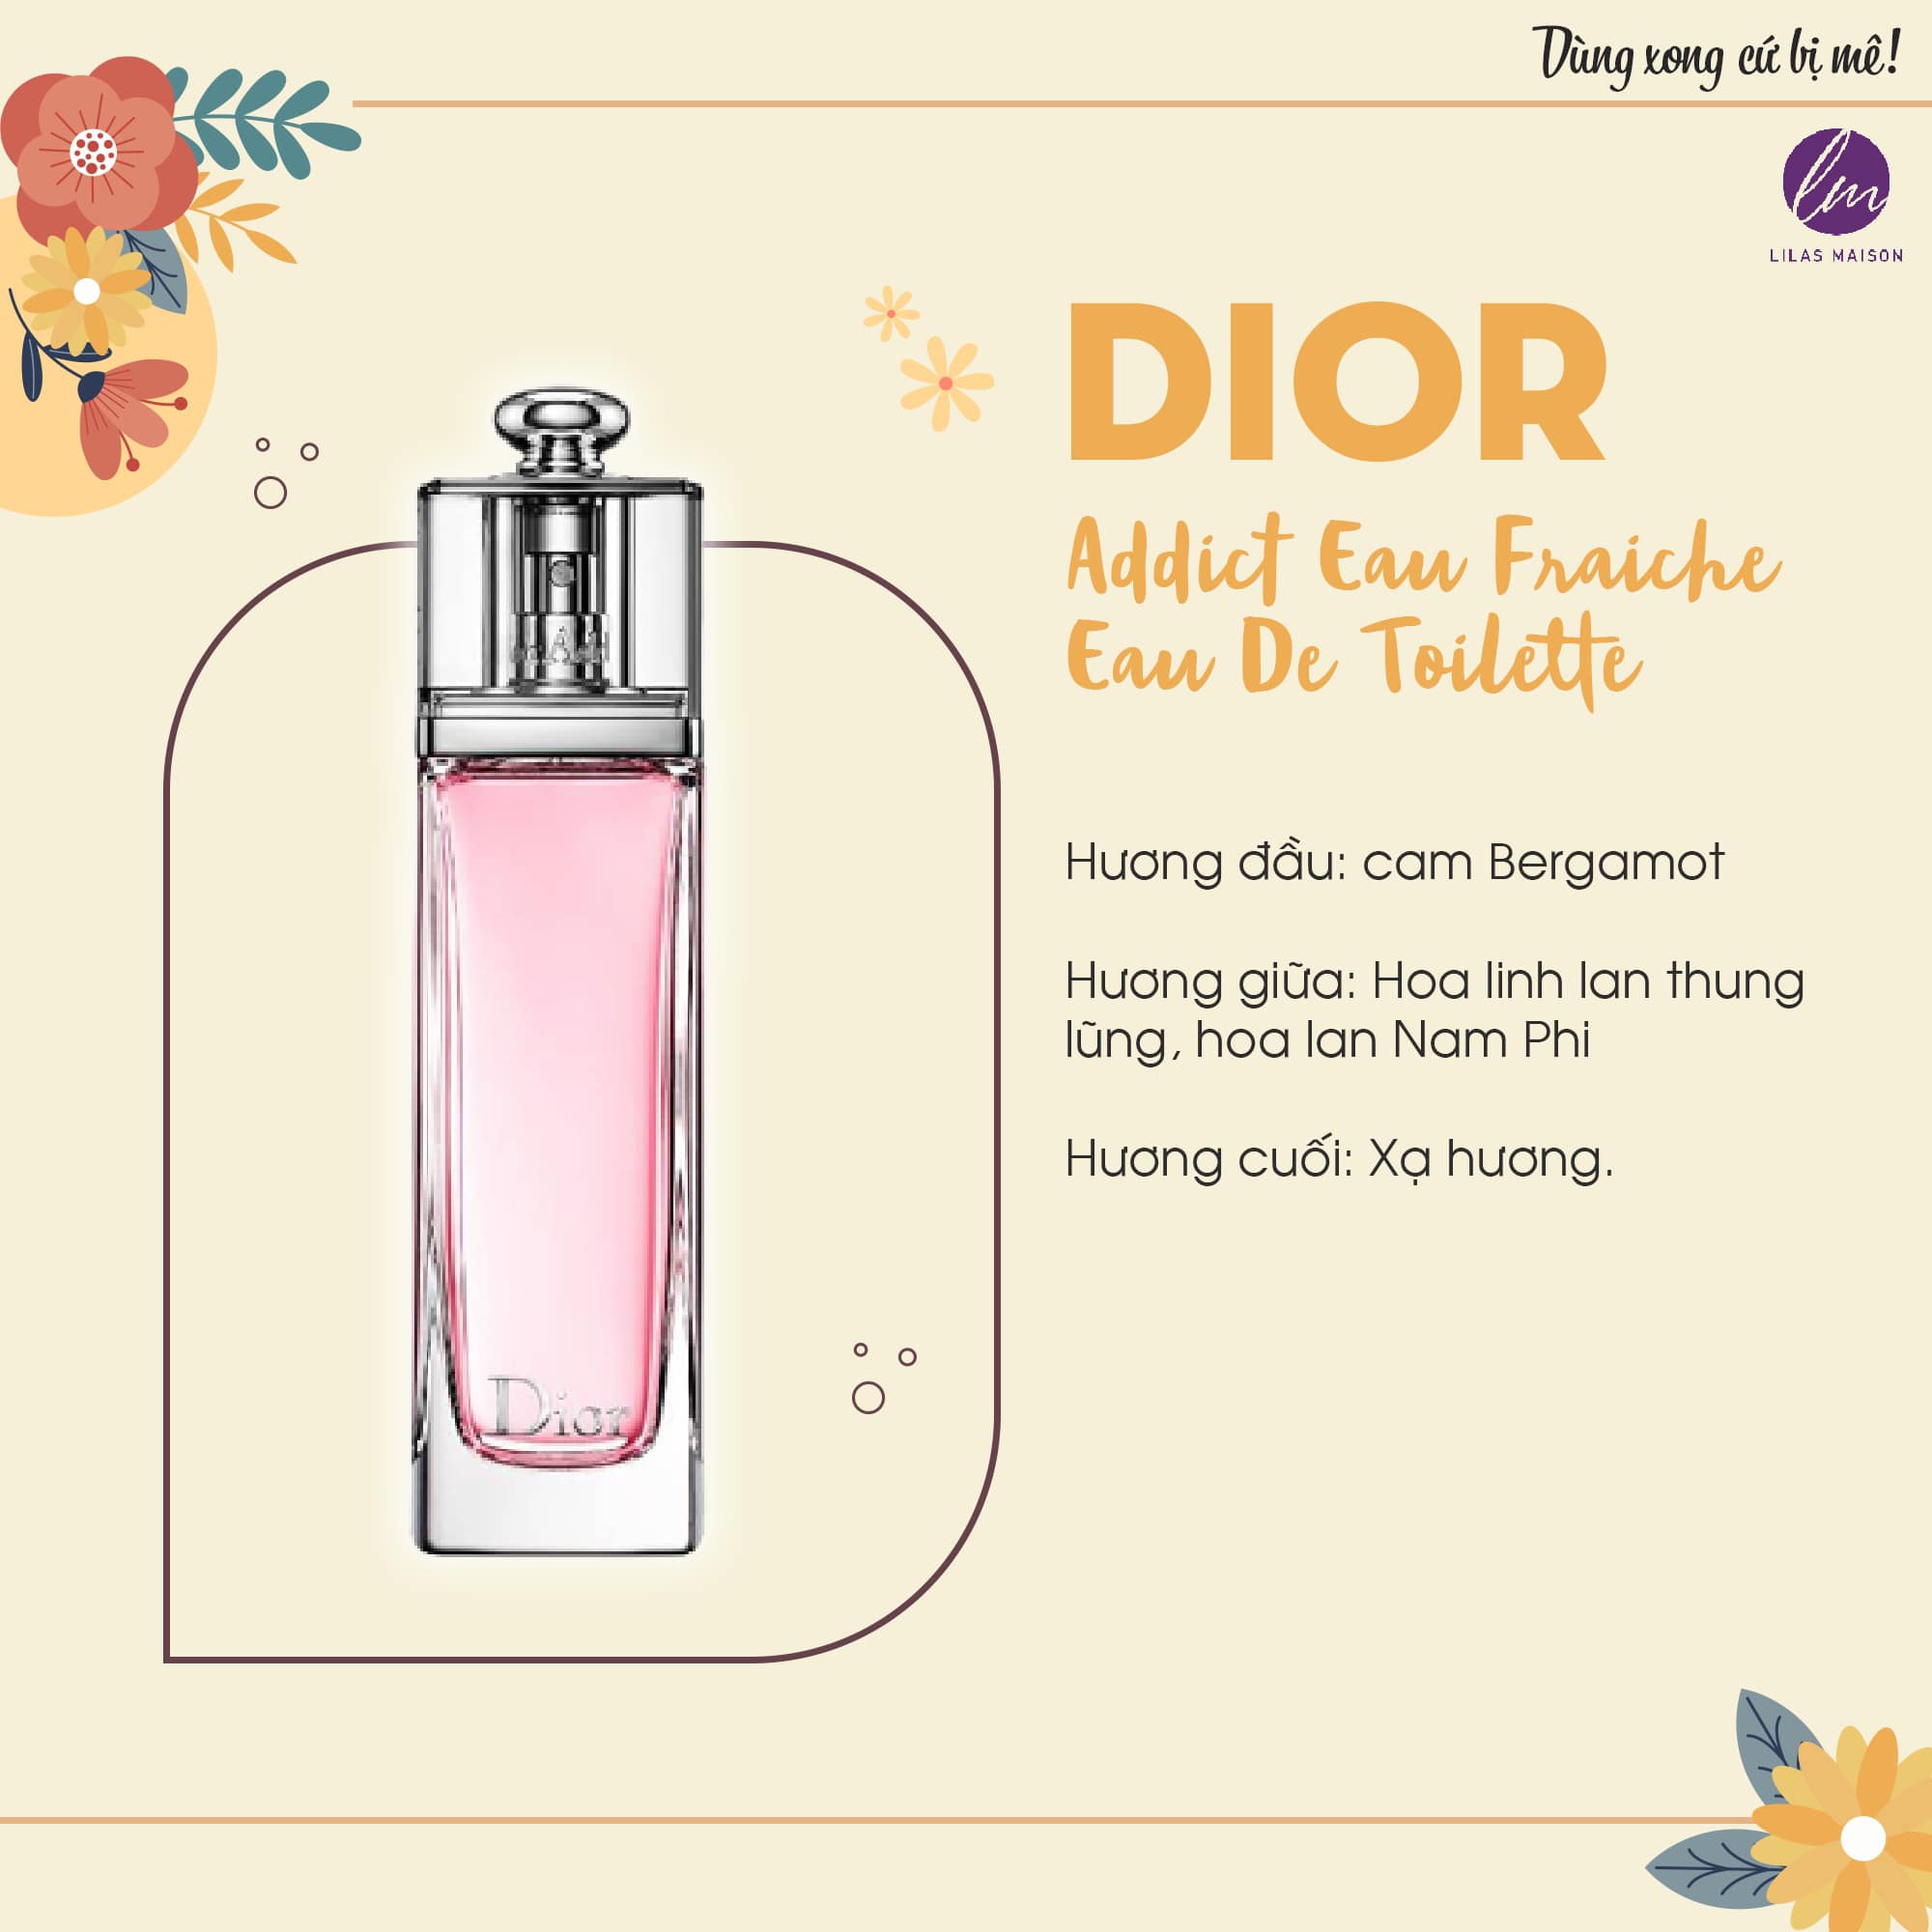 Dior Addict To Life by Christian Dior Eau de Parfum 100ml Perfume  Christian Dior launched its newest edition to its line Addict to life in  June of 2011 Addict to life is